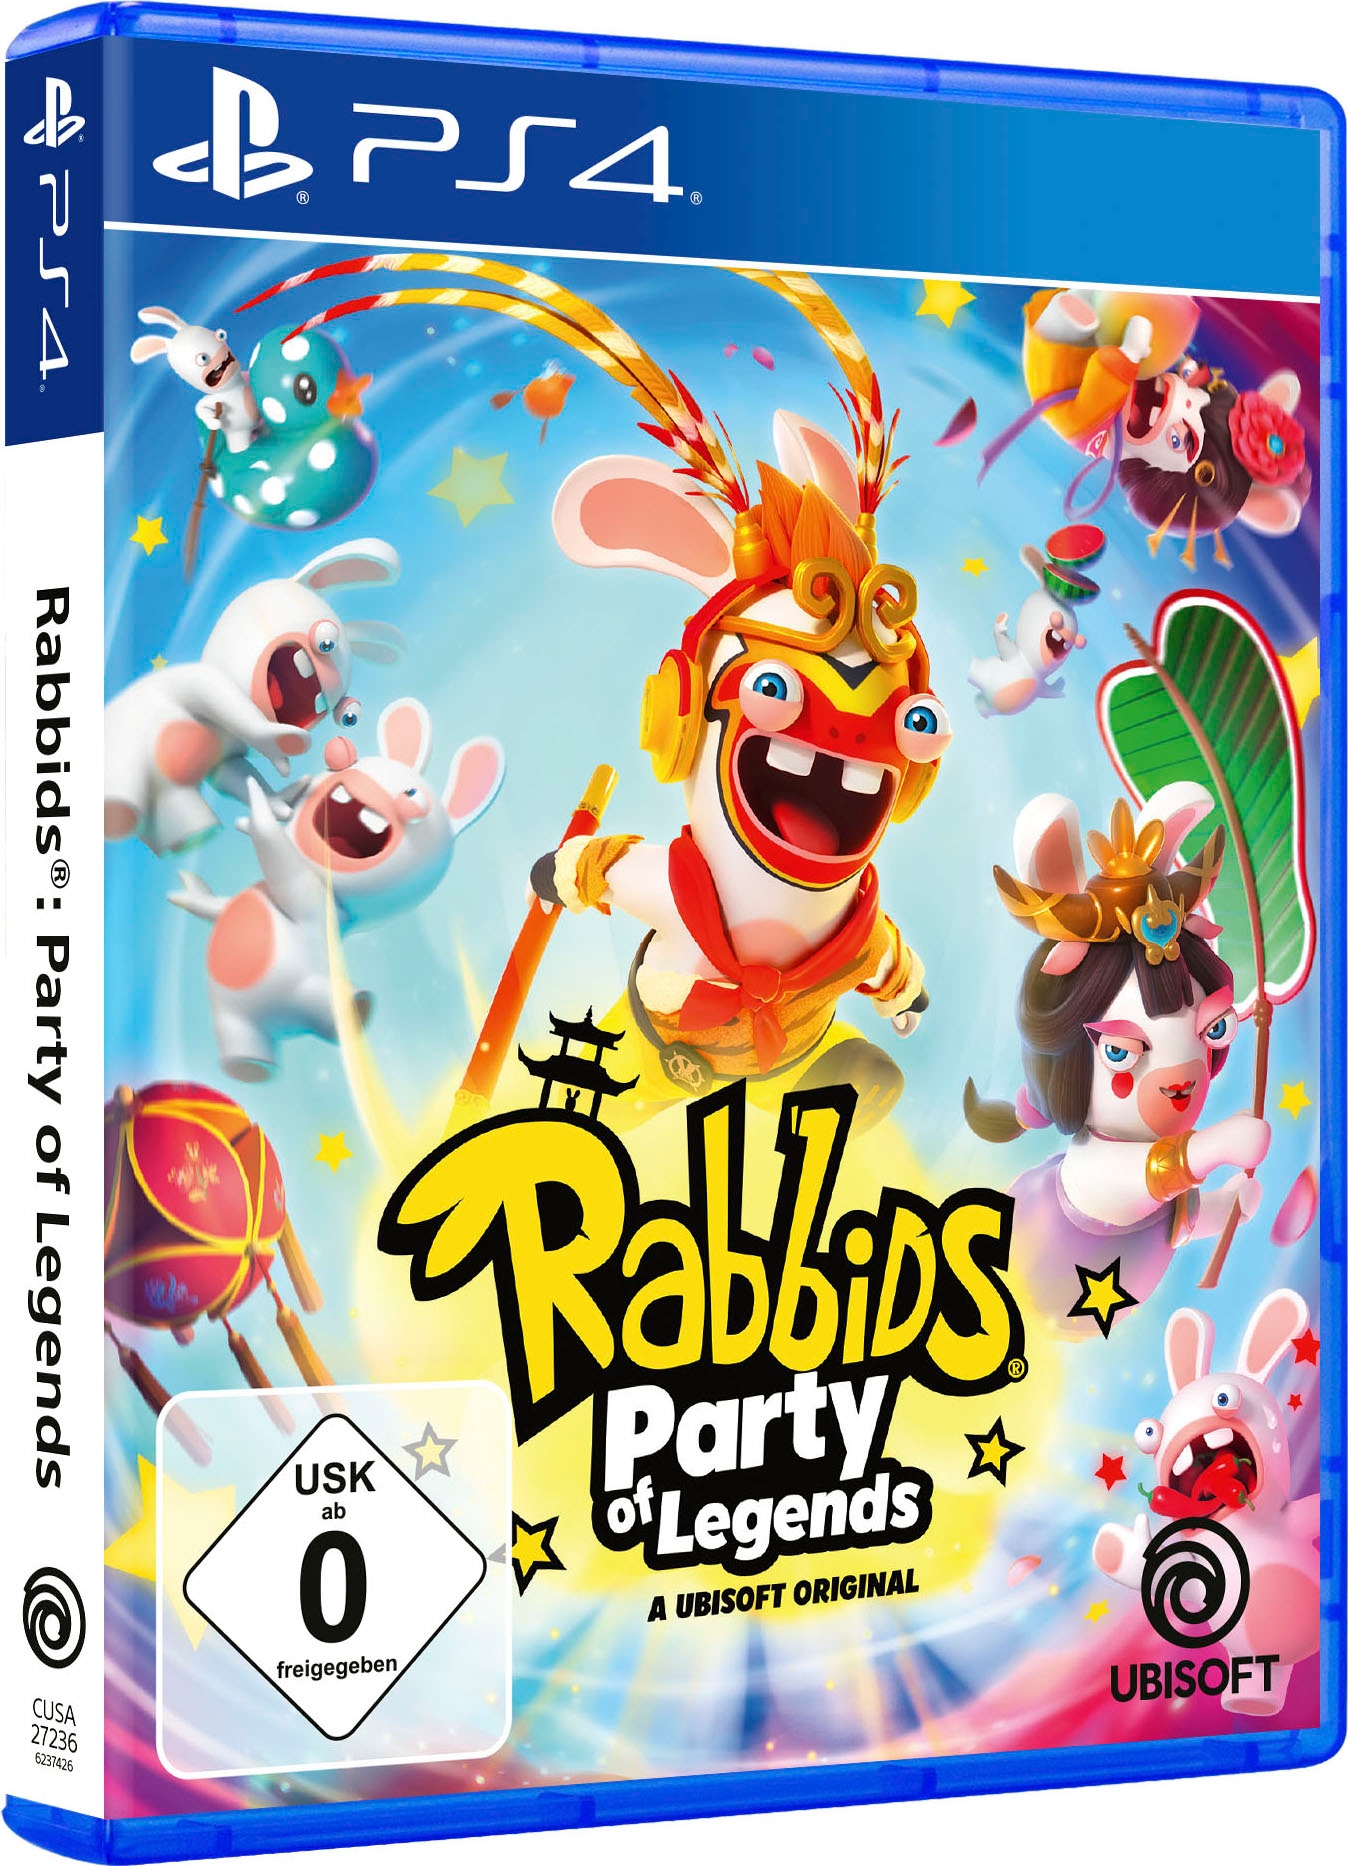 Spielesoftware »Rabbids Party of Legends«, PlayStation 4